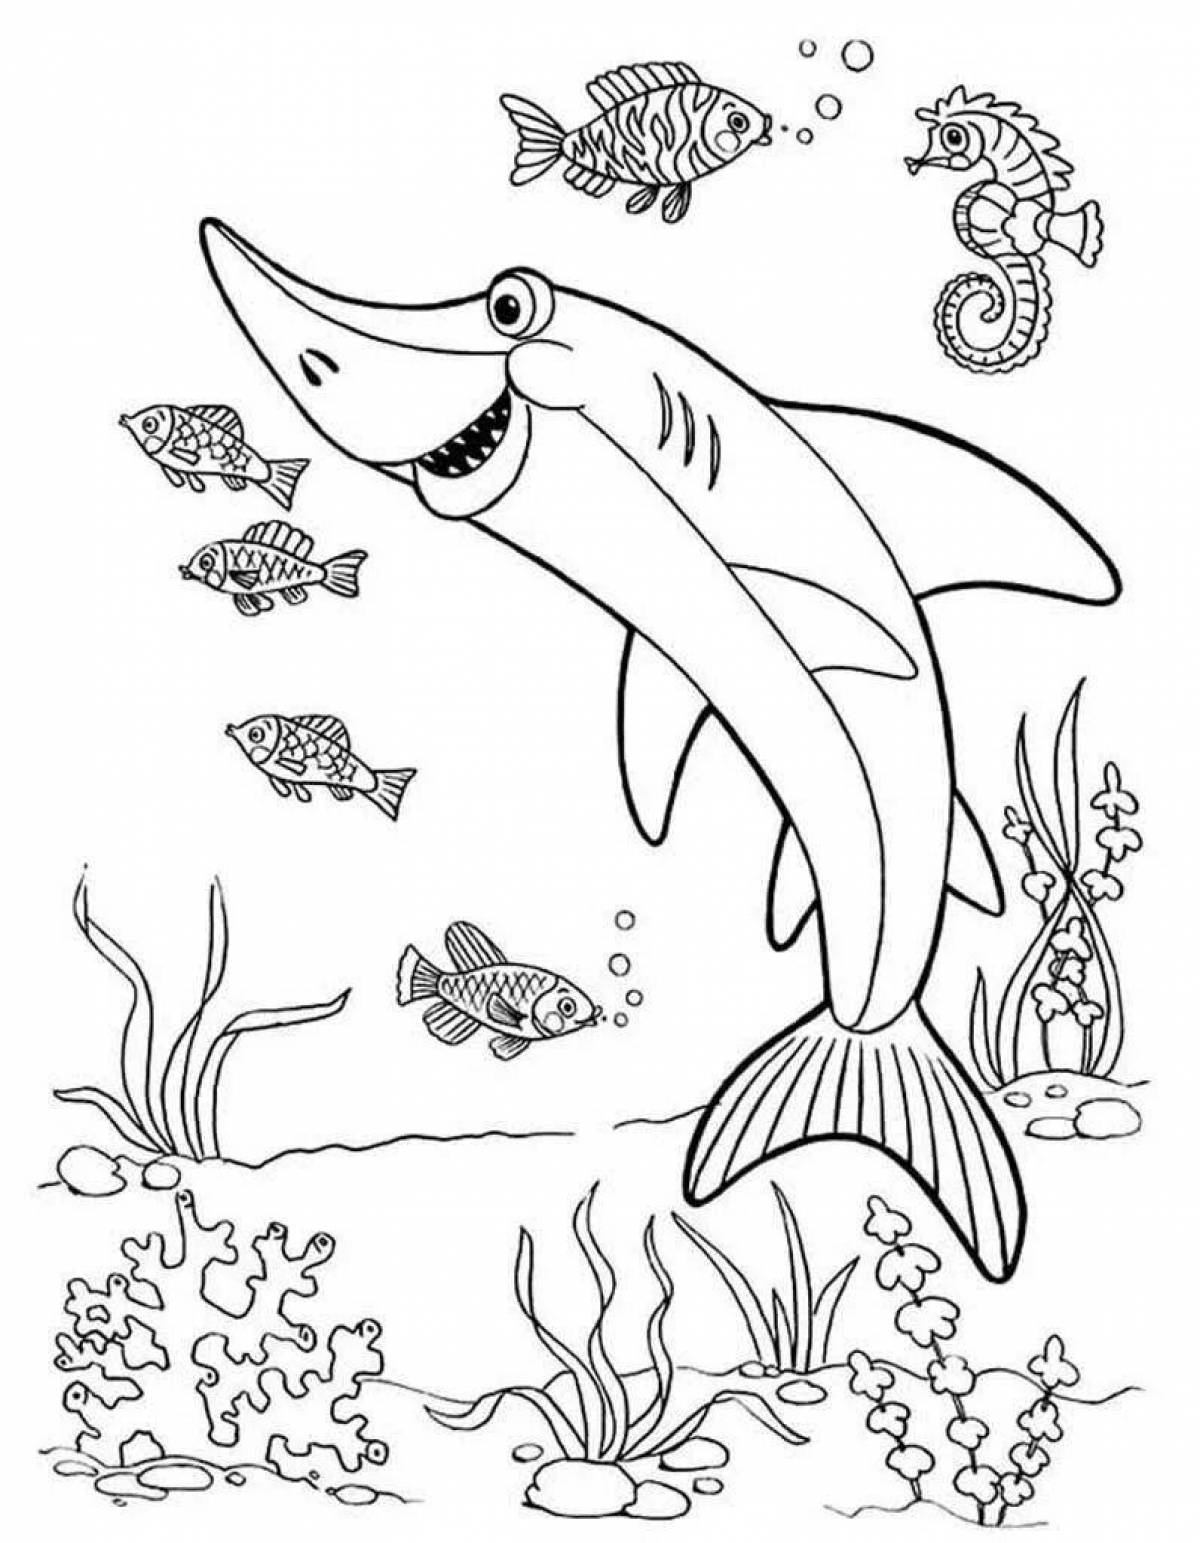 Impressive coloring pages animals of the seas and oceans